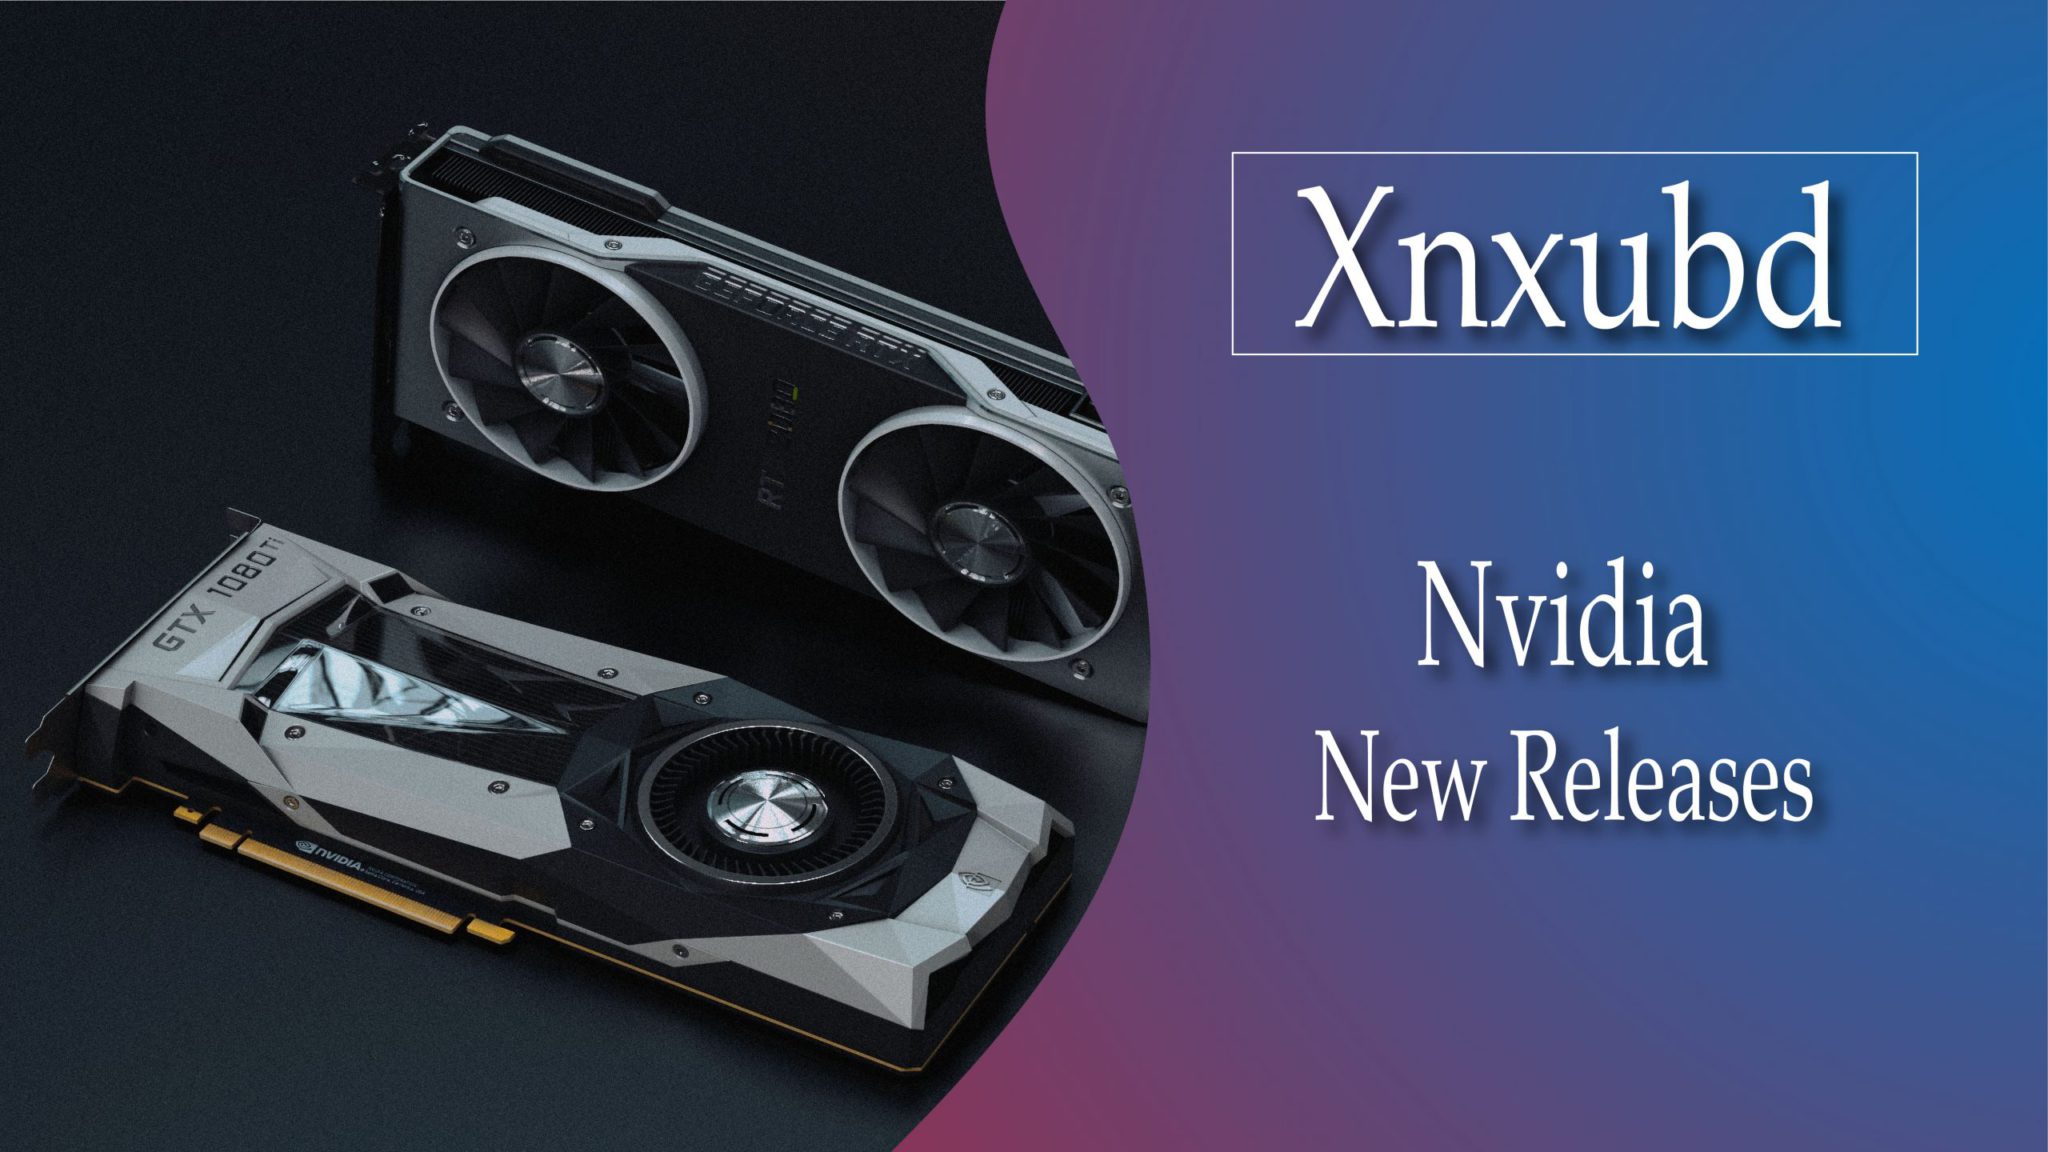 According with speculation, the current Nvidia Xnxubd 2021nvidia graphics c...